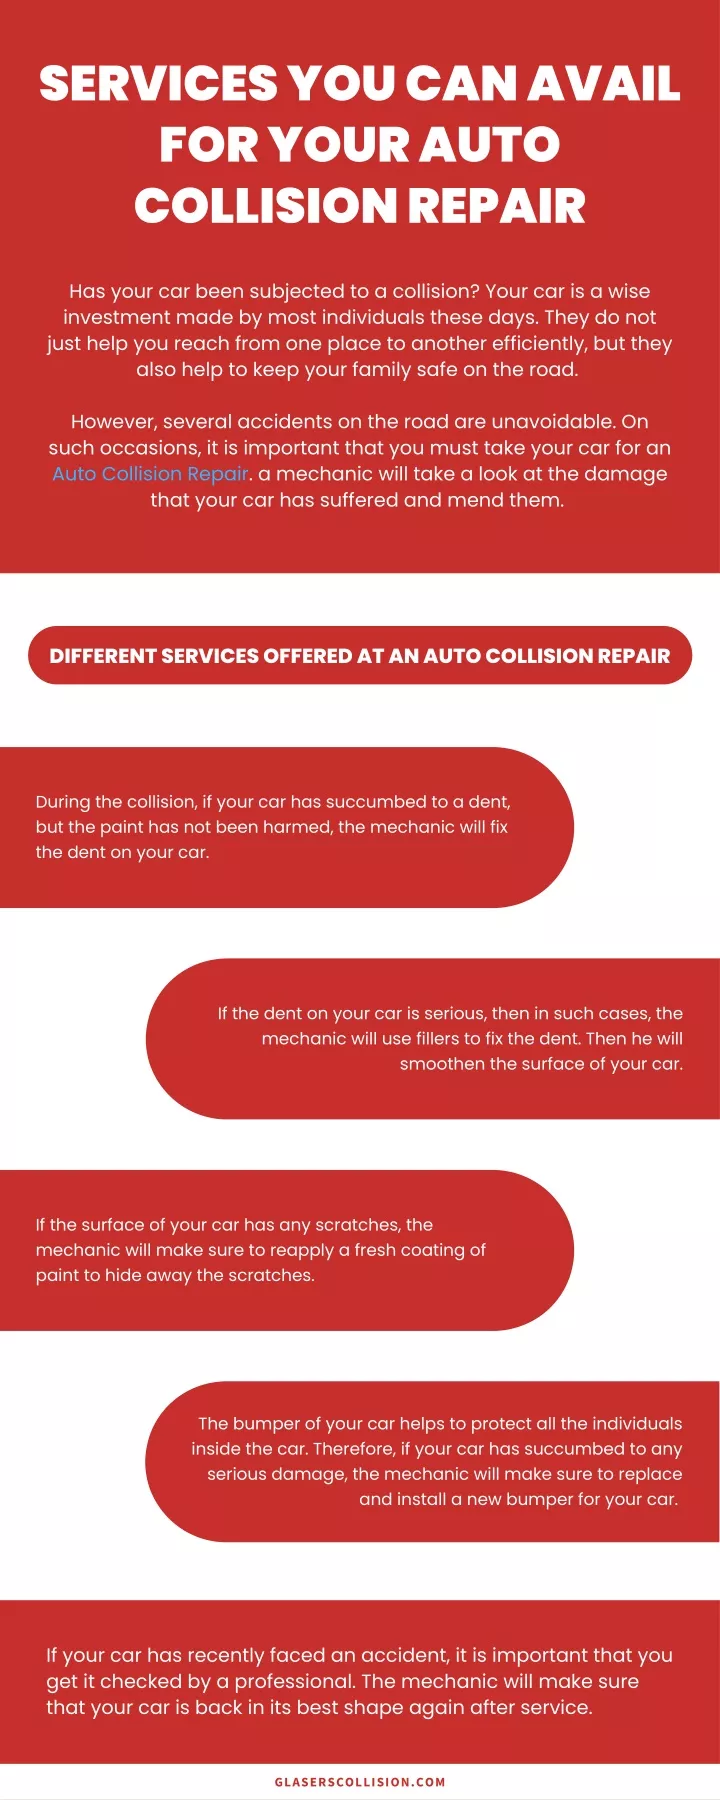 services you can avail for your auto collision